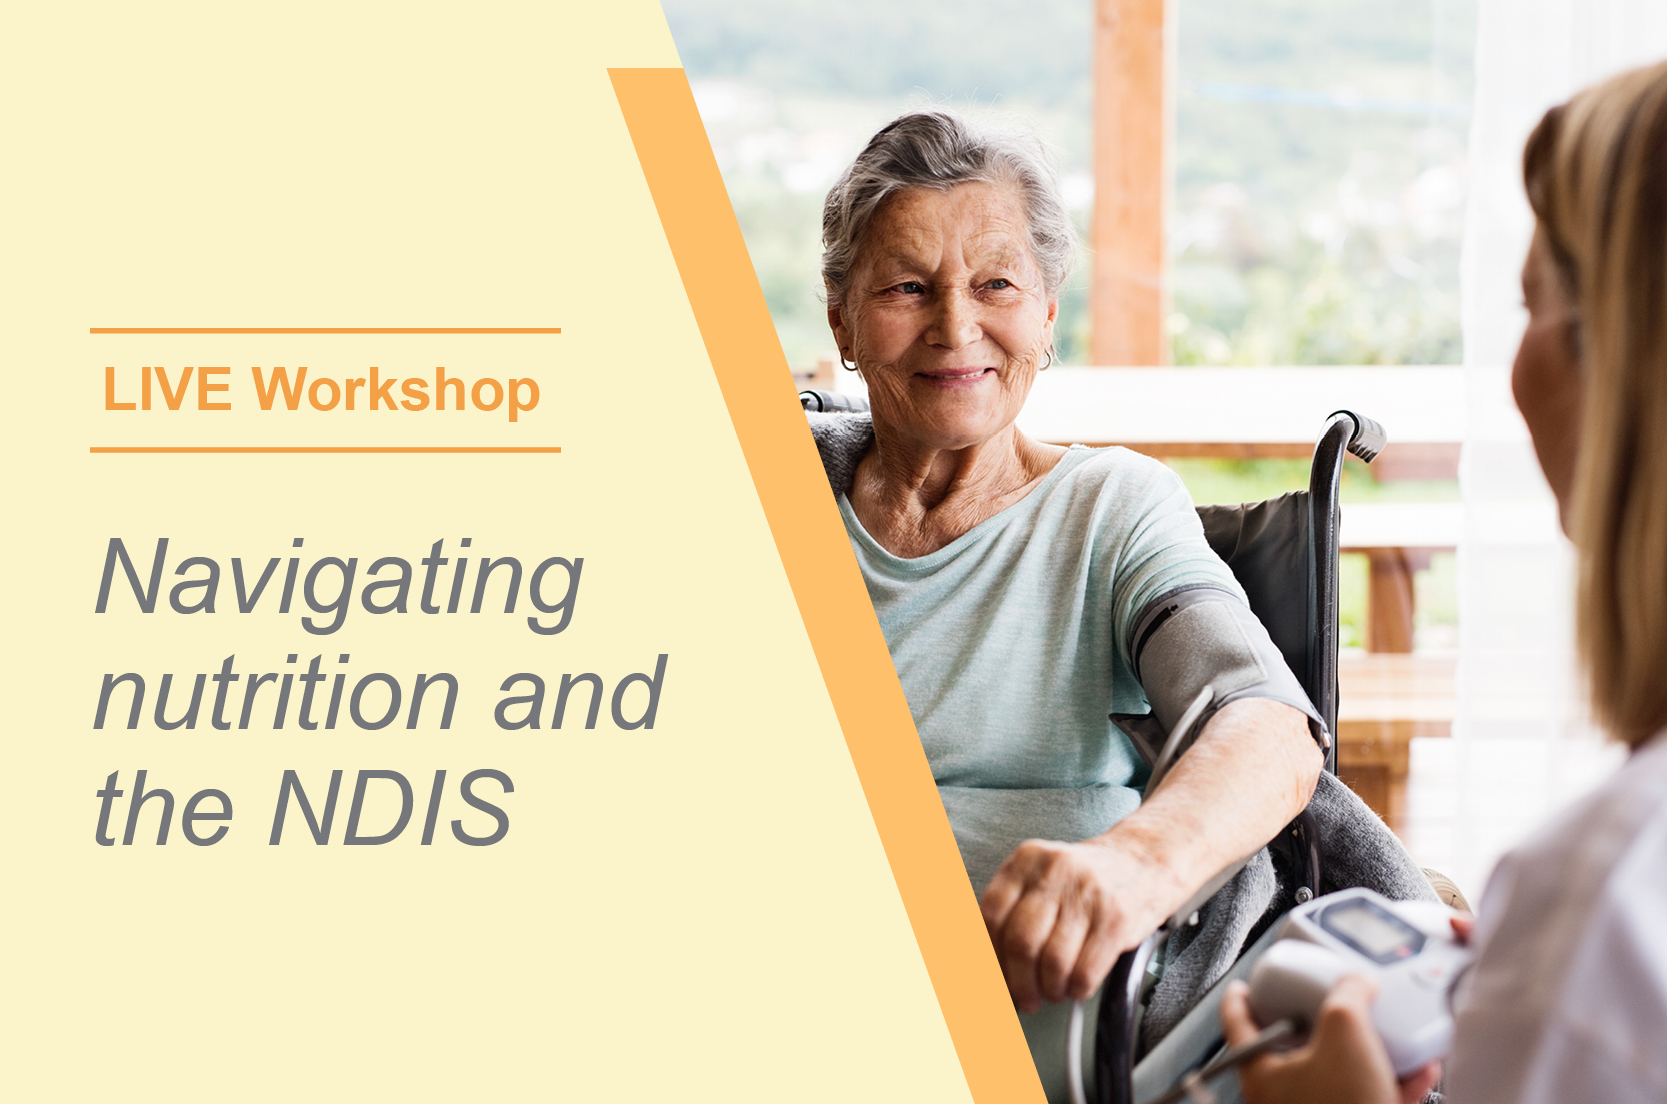 NDIS workshop: Navigating nutrition and the NDIS